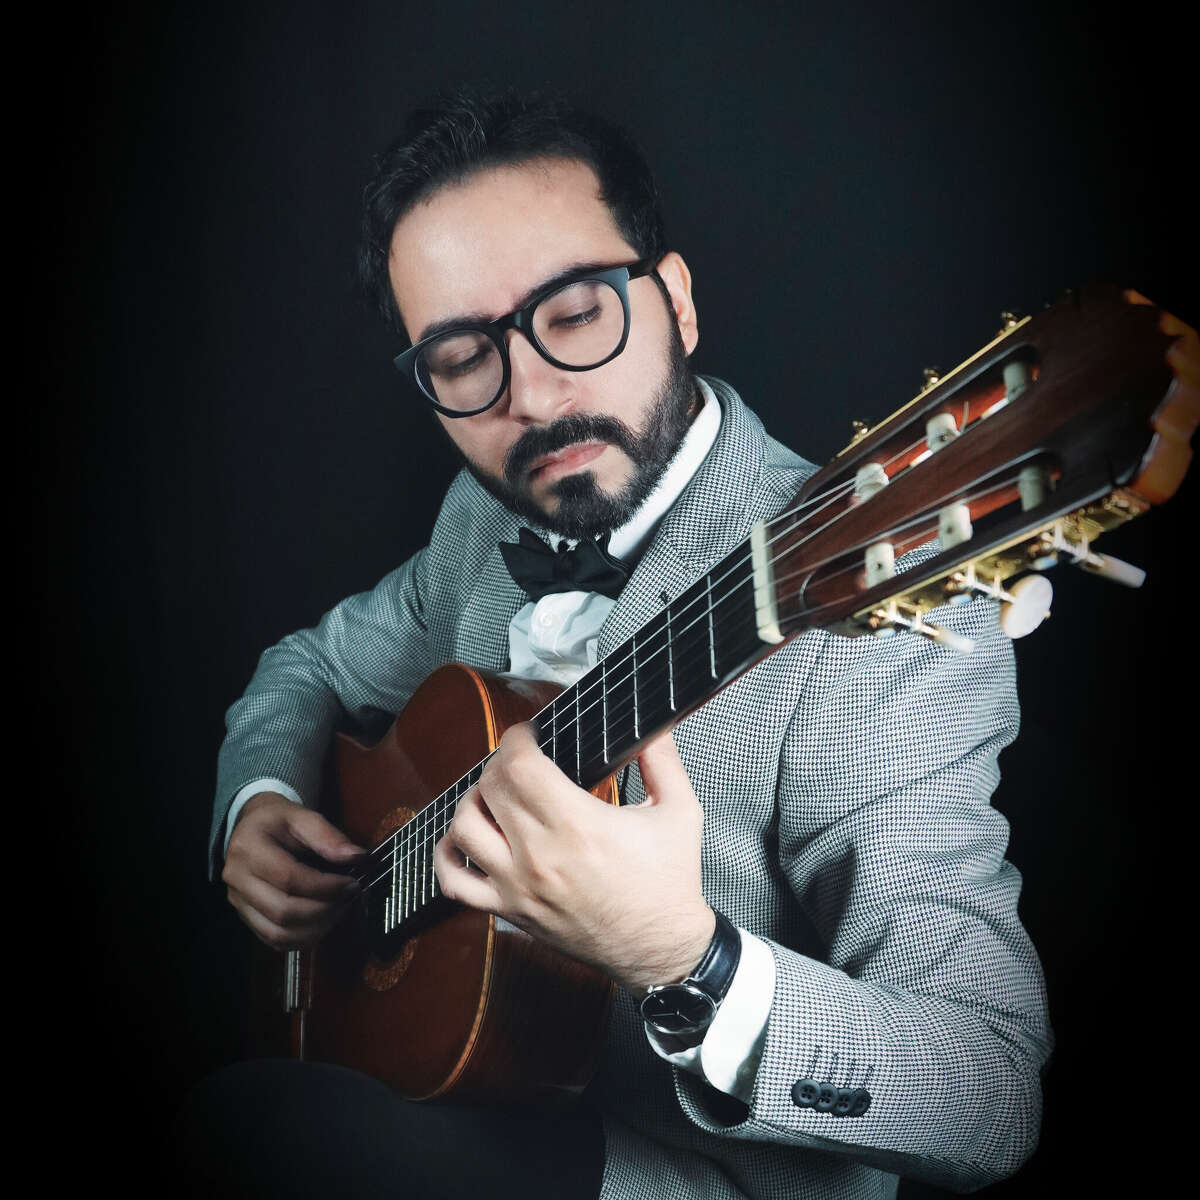 Laredo College will host a free concert featuring award-winning guitarist Dr. Hector Javier Rodriguez Santos this weekend, the college announced Wednesday.